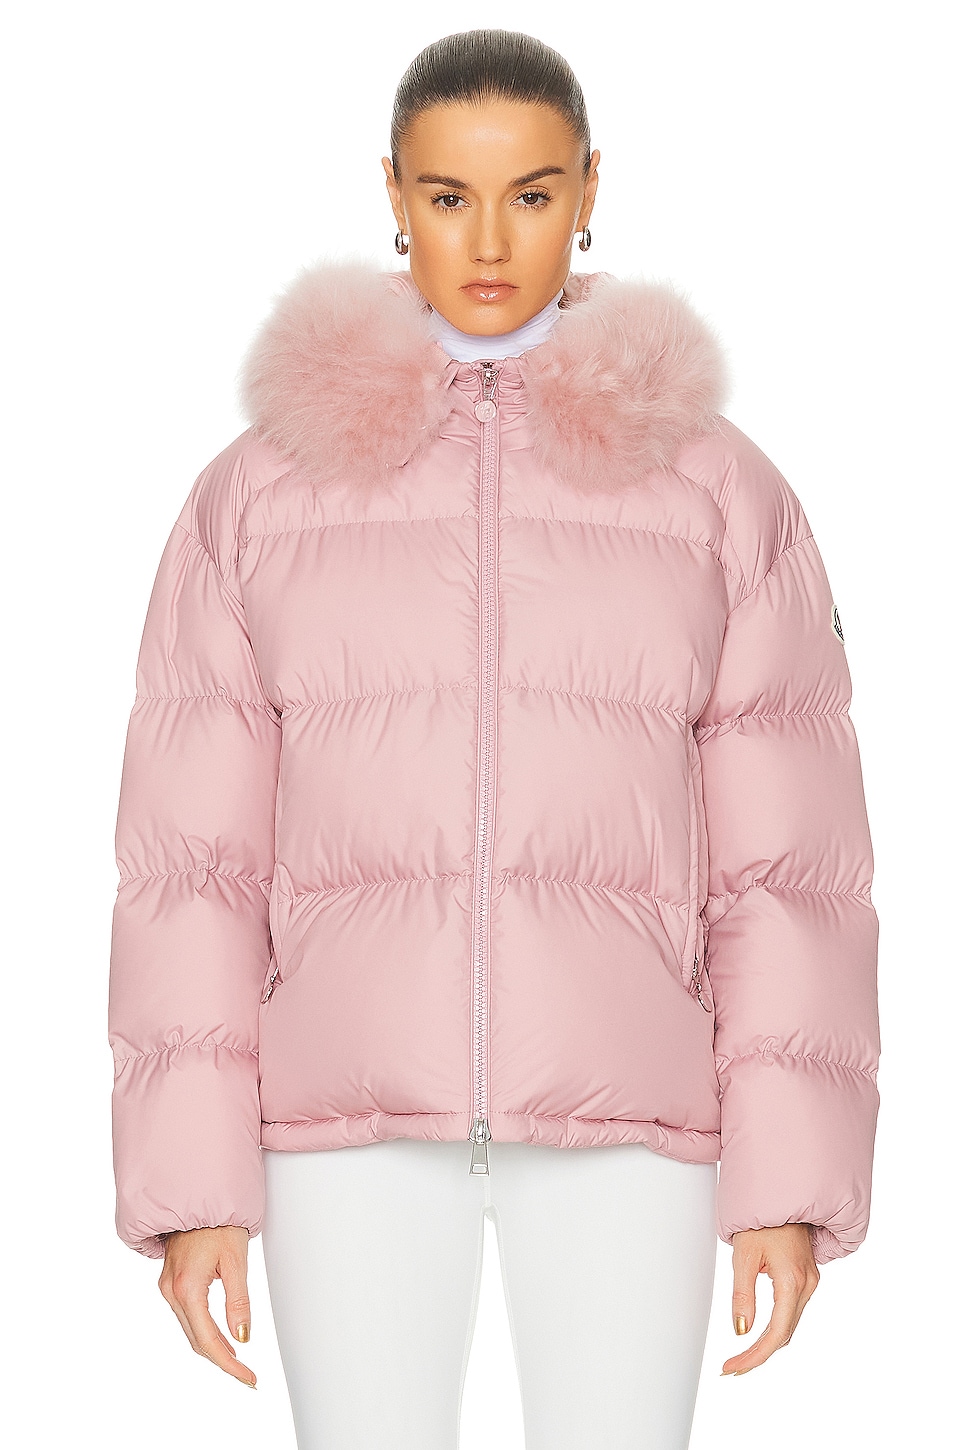 Moncler | Resort 2024 Collection | FWRD